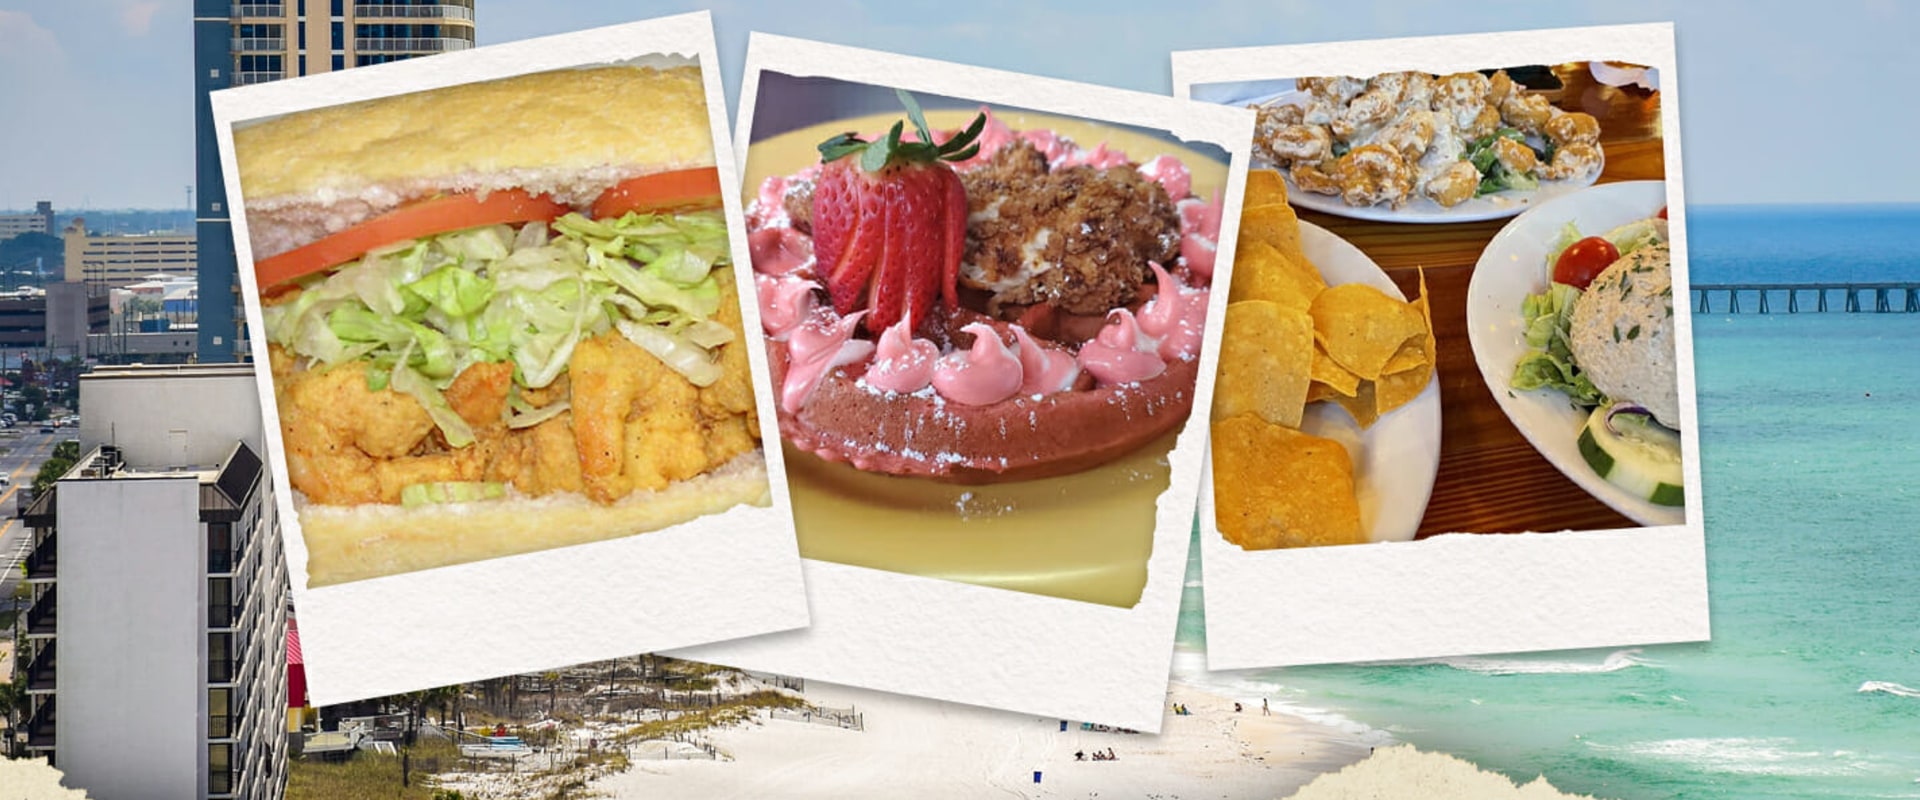 The Best Seafood and Steak Restaurants in Panama City Beach, Florida